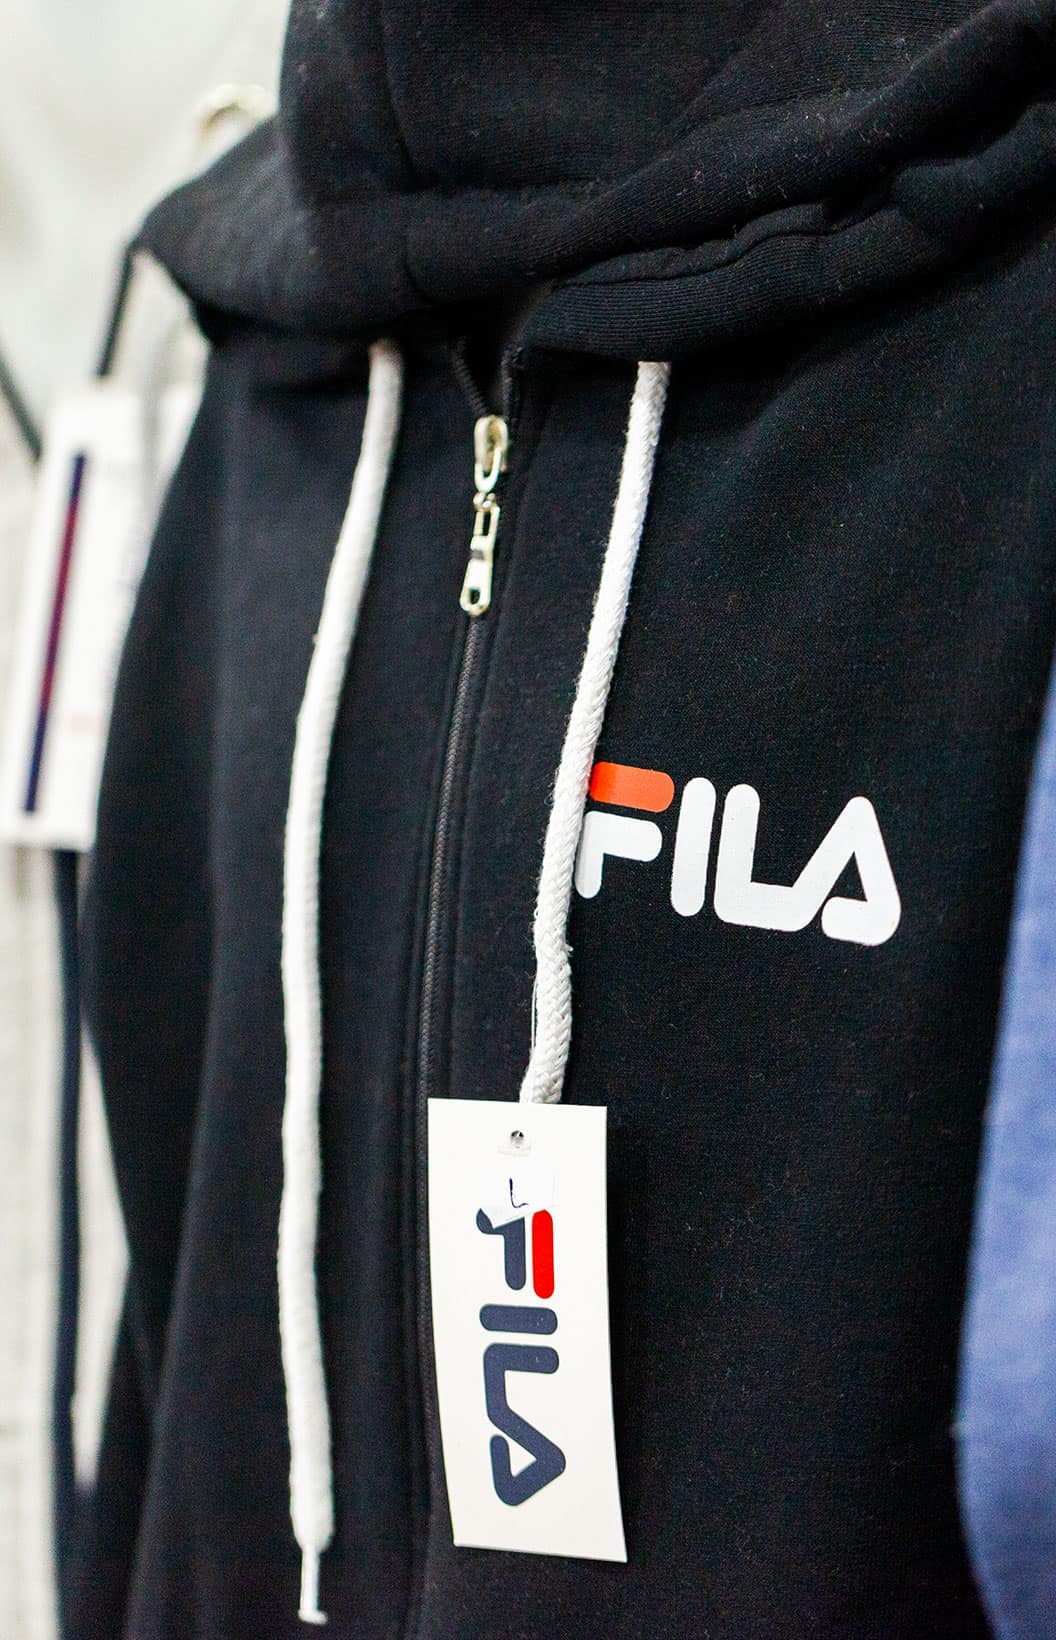 FILA: Will Better Serve Apparel and Footwear Customers with Cloud ERP